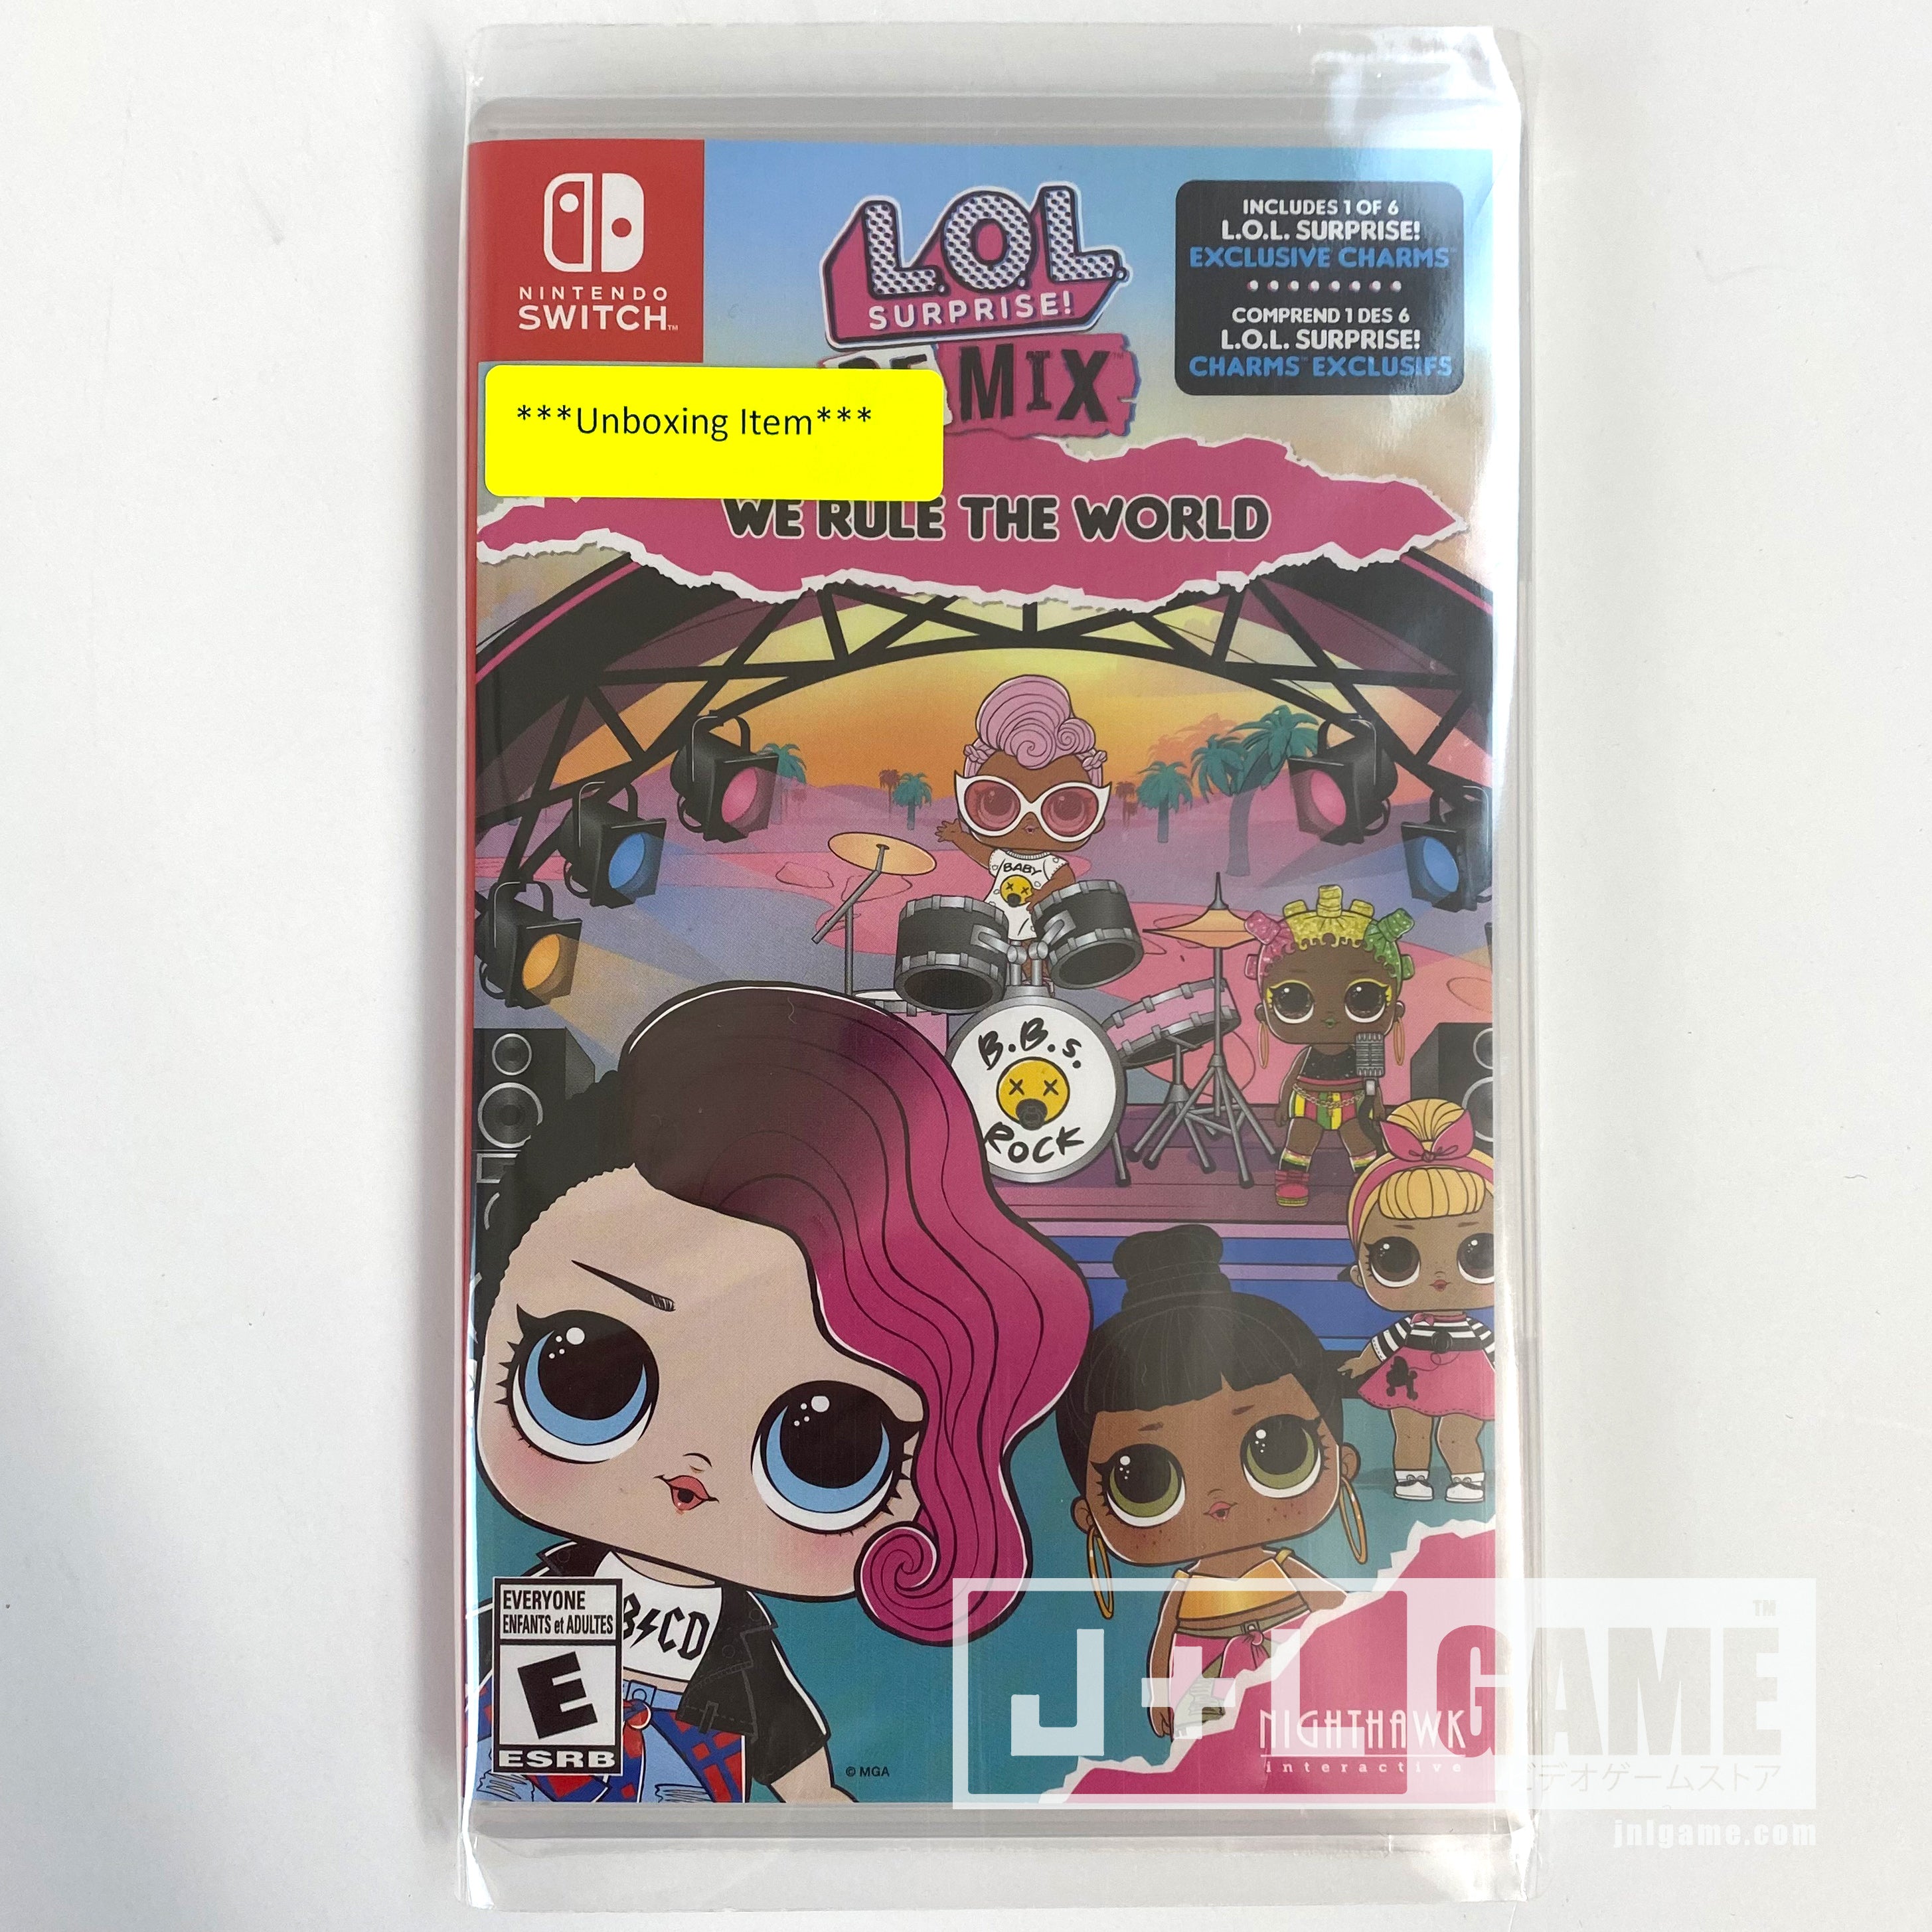 L.O.L Surprise! Remix: We Rule The World - (NSW) Nintendo Switch [UNBOXING] Video Games Nighthawk Interactive   